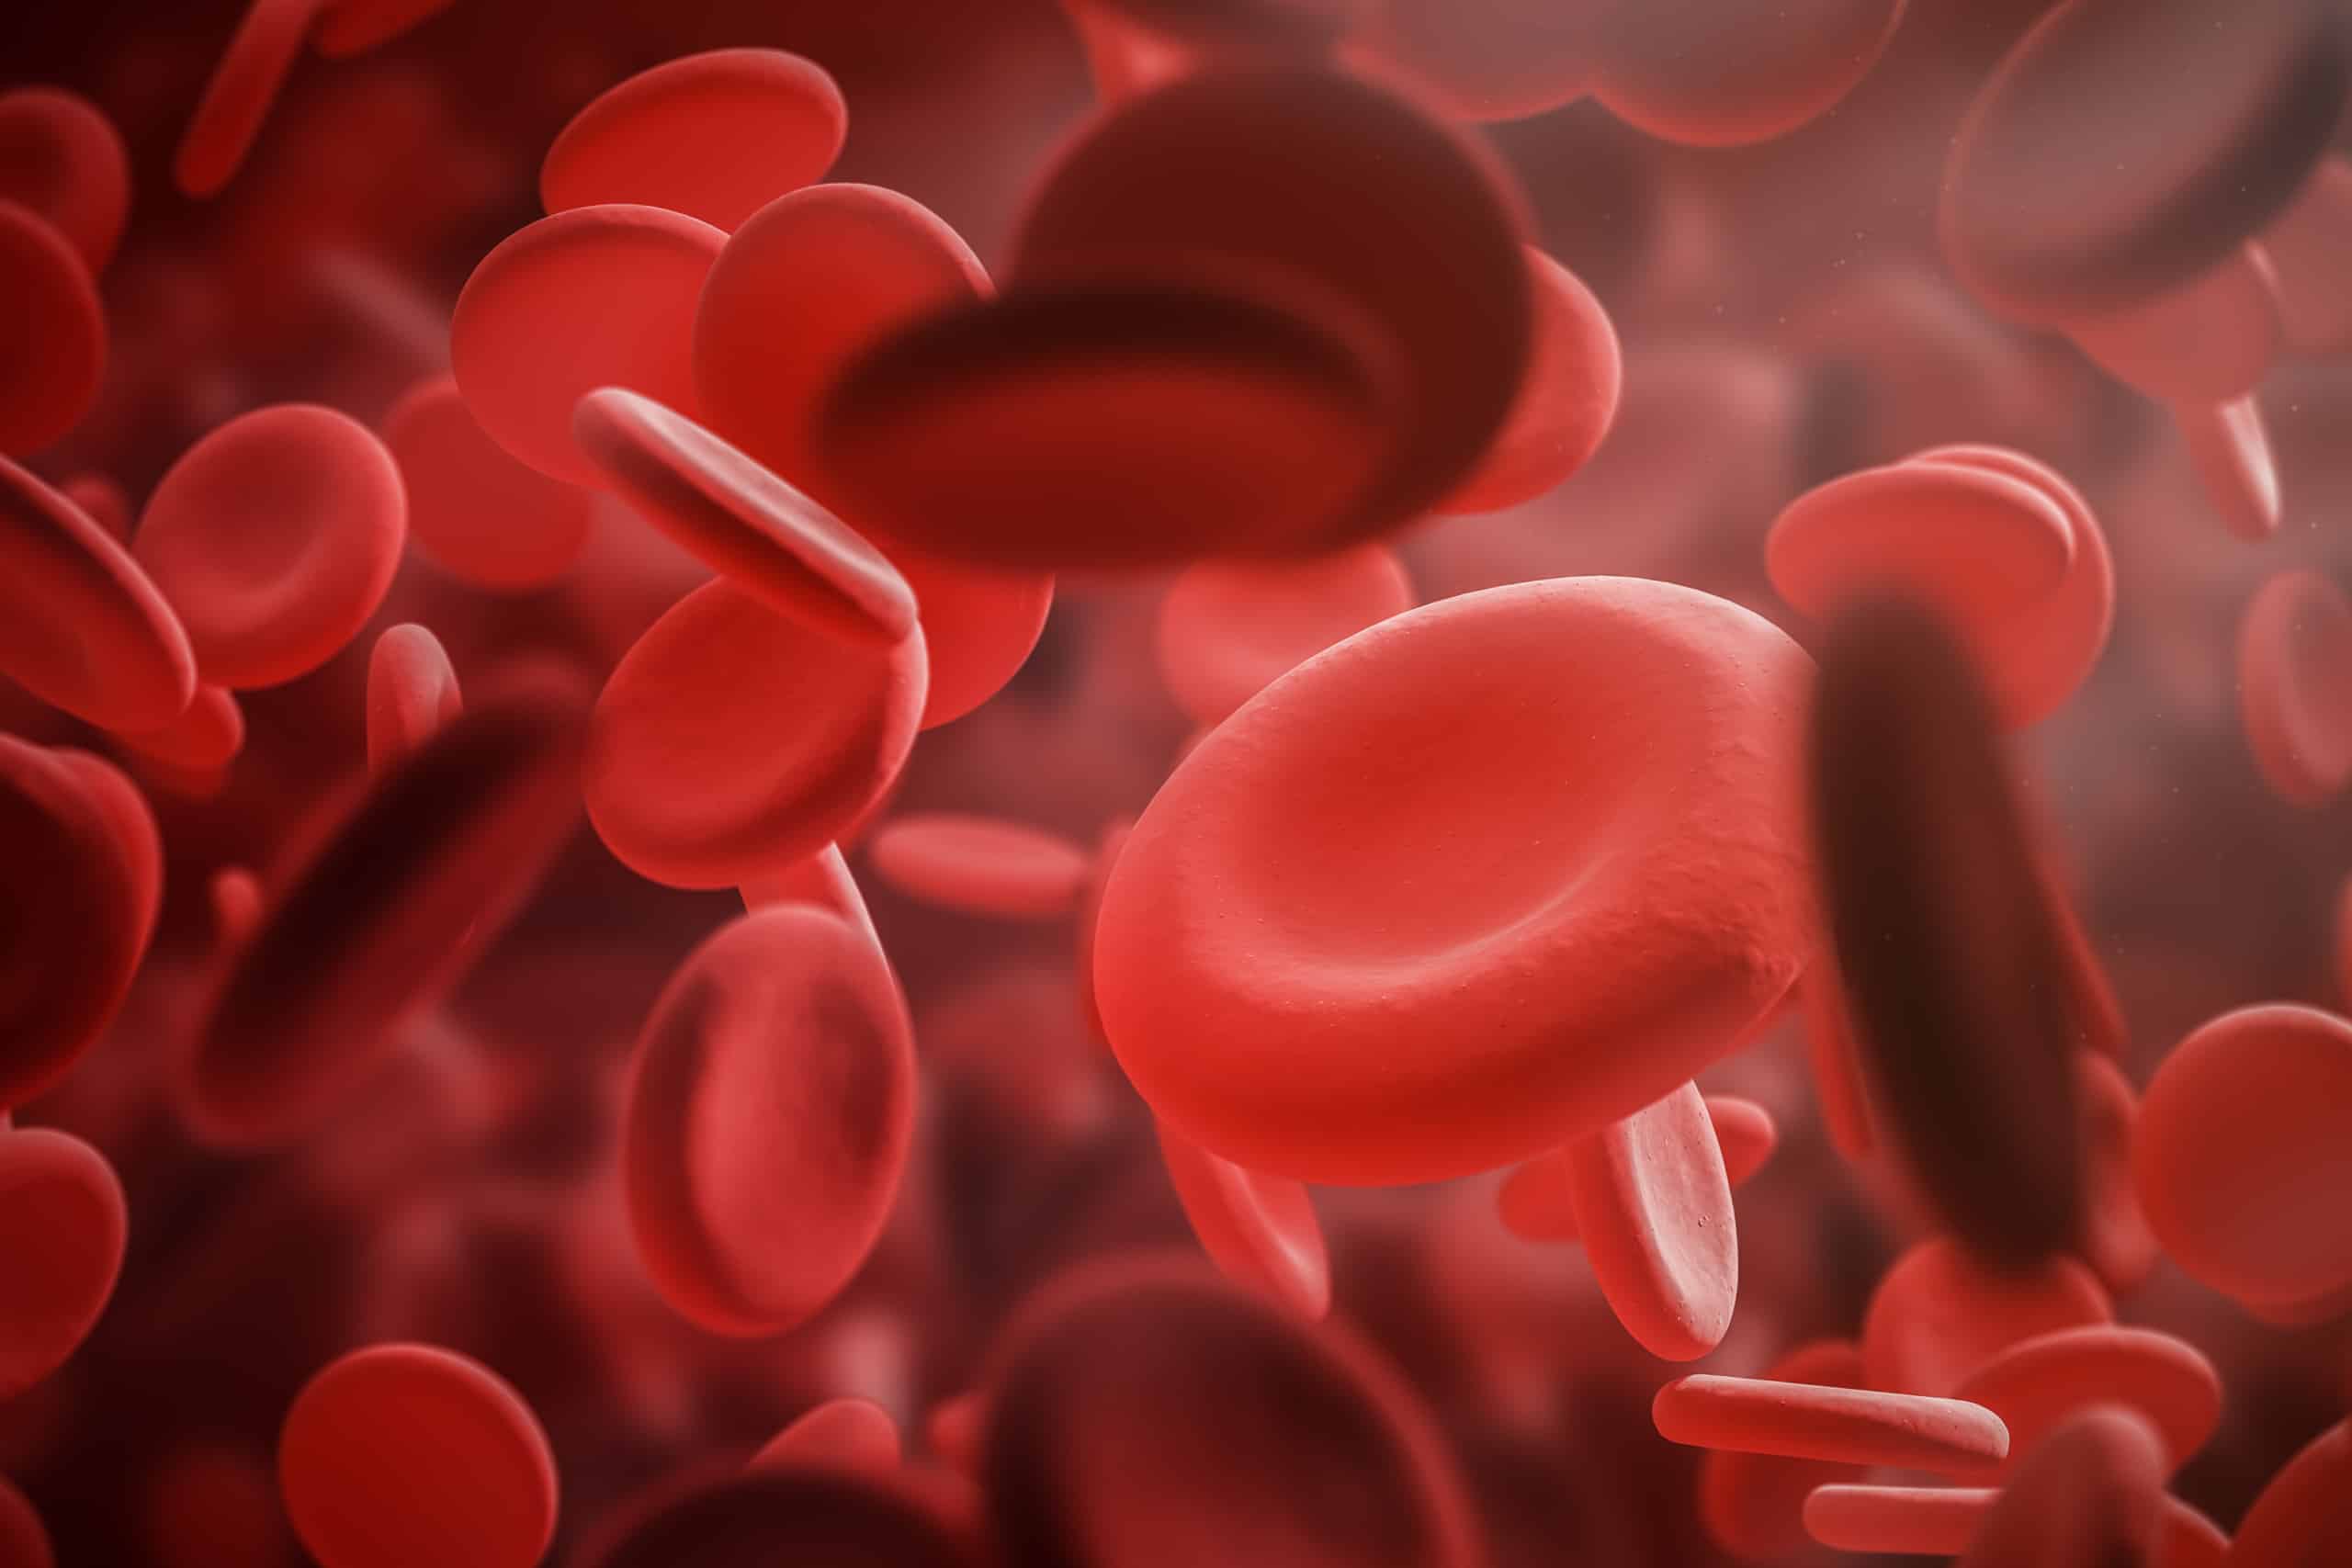 The full correction of anemia takes up to 90 days, which is the life cycle of each red blood cell.